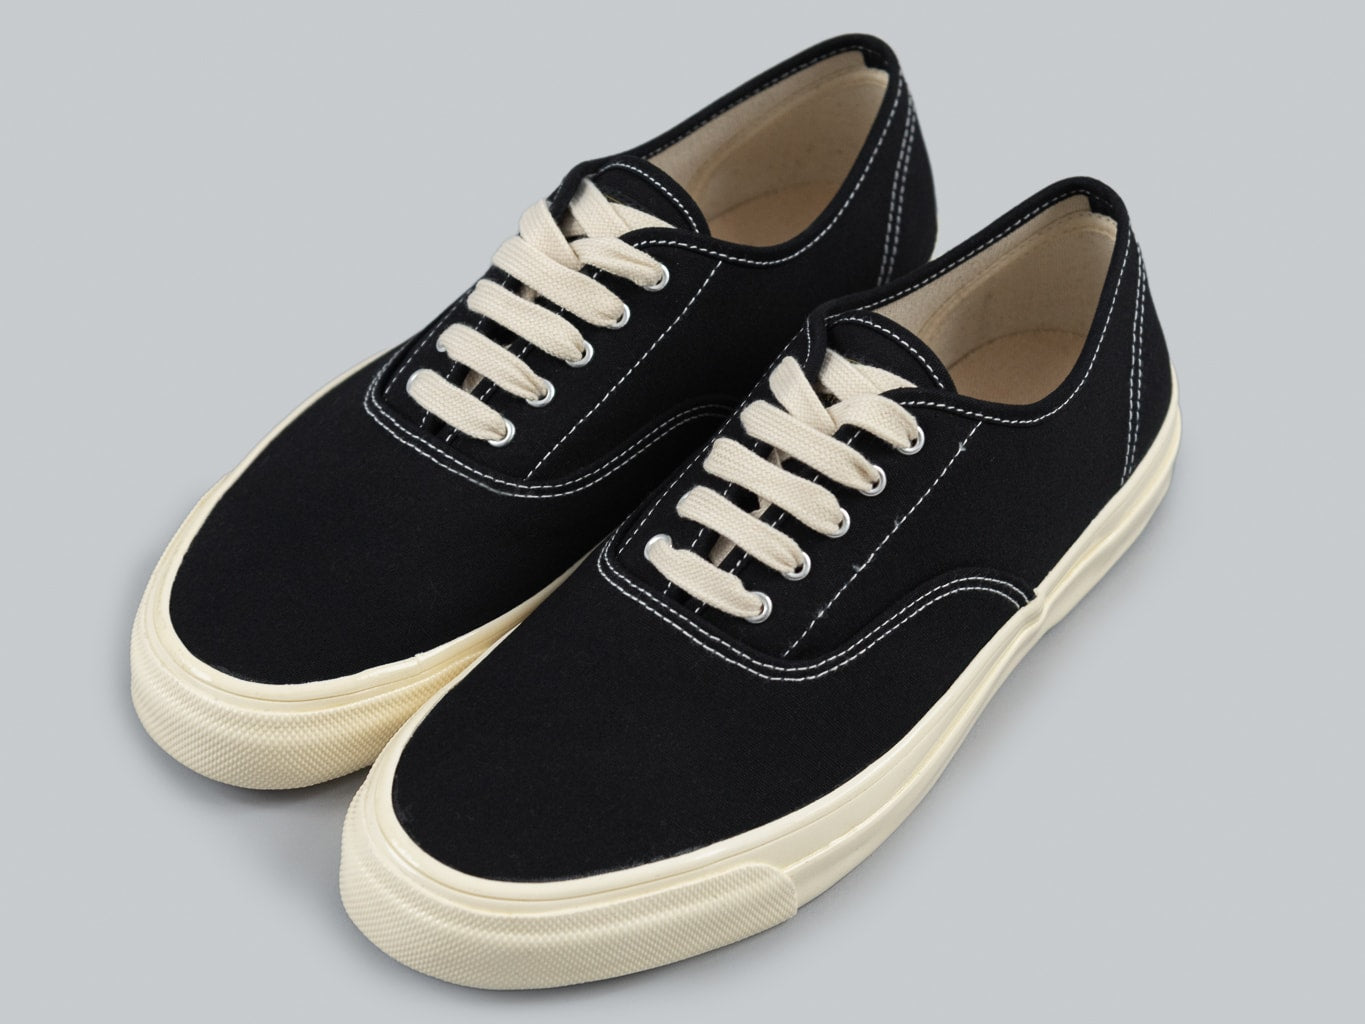 Trophy clothing mil boat shoes black cream sneakers taiwan